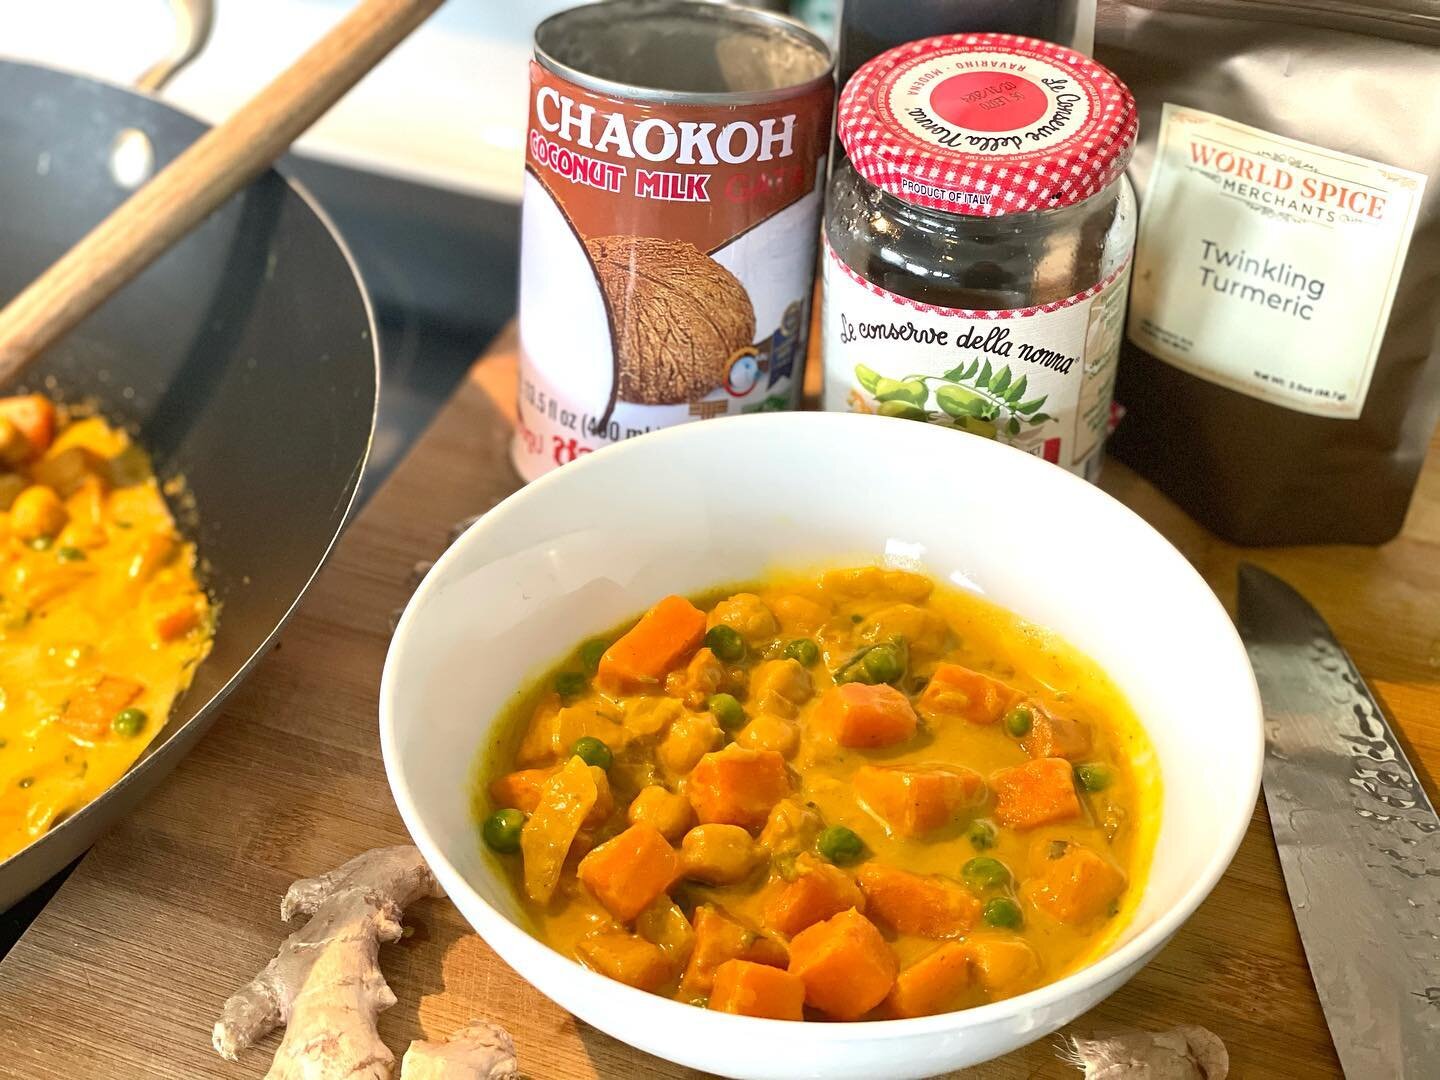 Another fun recipe for our Spring Spice Kit, featuring✨Twinkling Turmeric Spice✨
 
  Sweet Potato 
  and Chickpea Stew

Back in London we had a friend from Kenya who would make this for our daughter and she LOVED it! She basically lived on it as a ba